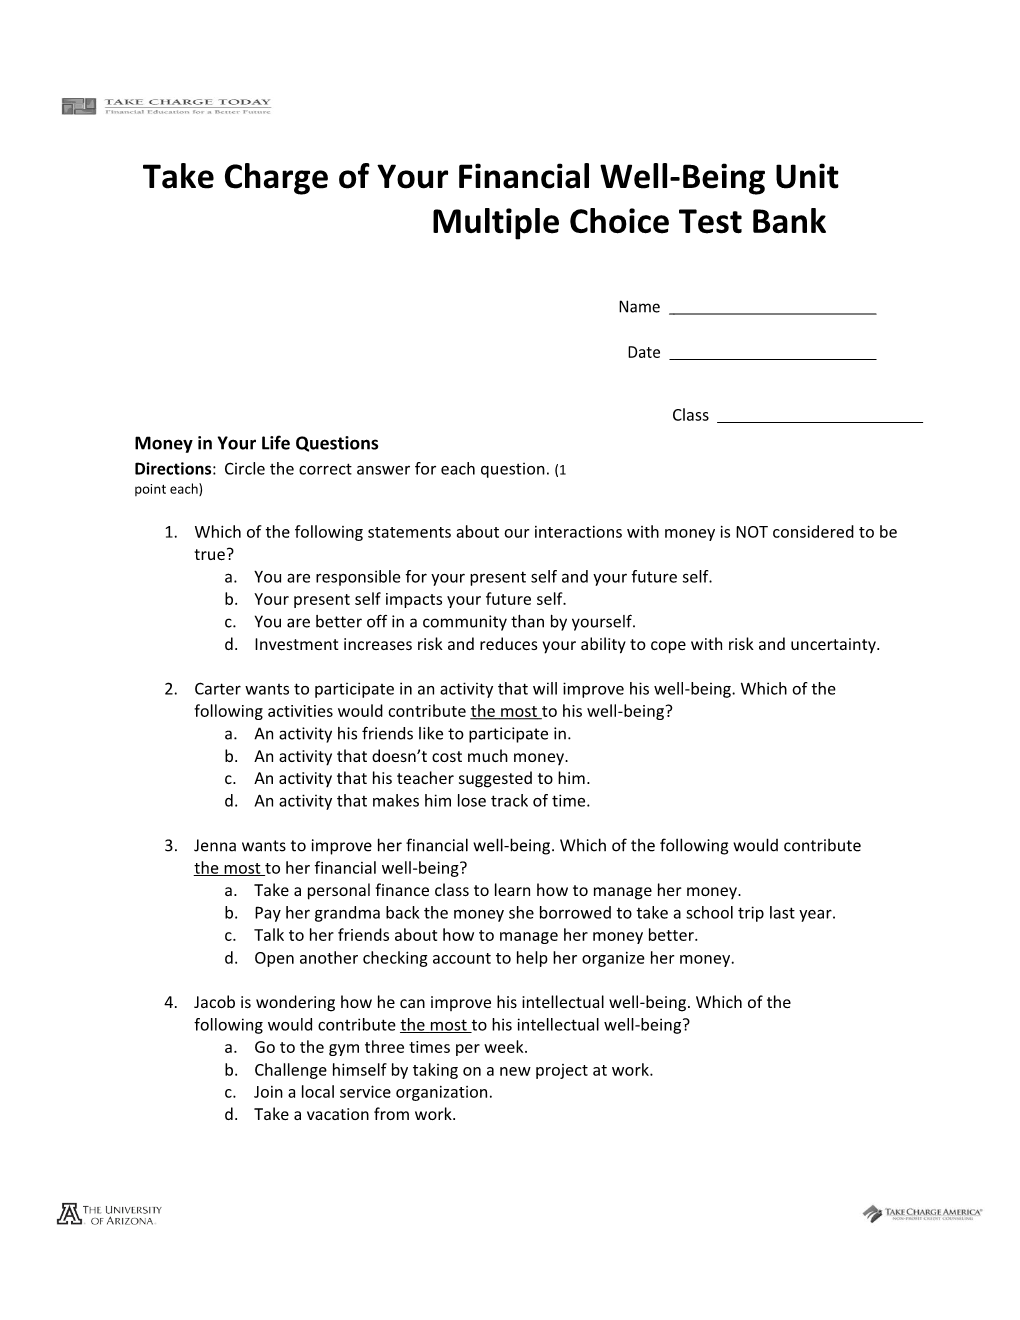 Taking Charge of Your Financial Well-Being Unit Multiple Choice Test Bank 2.1.0.M1